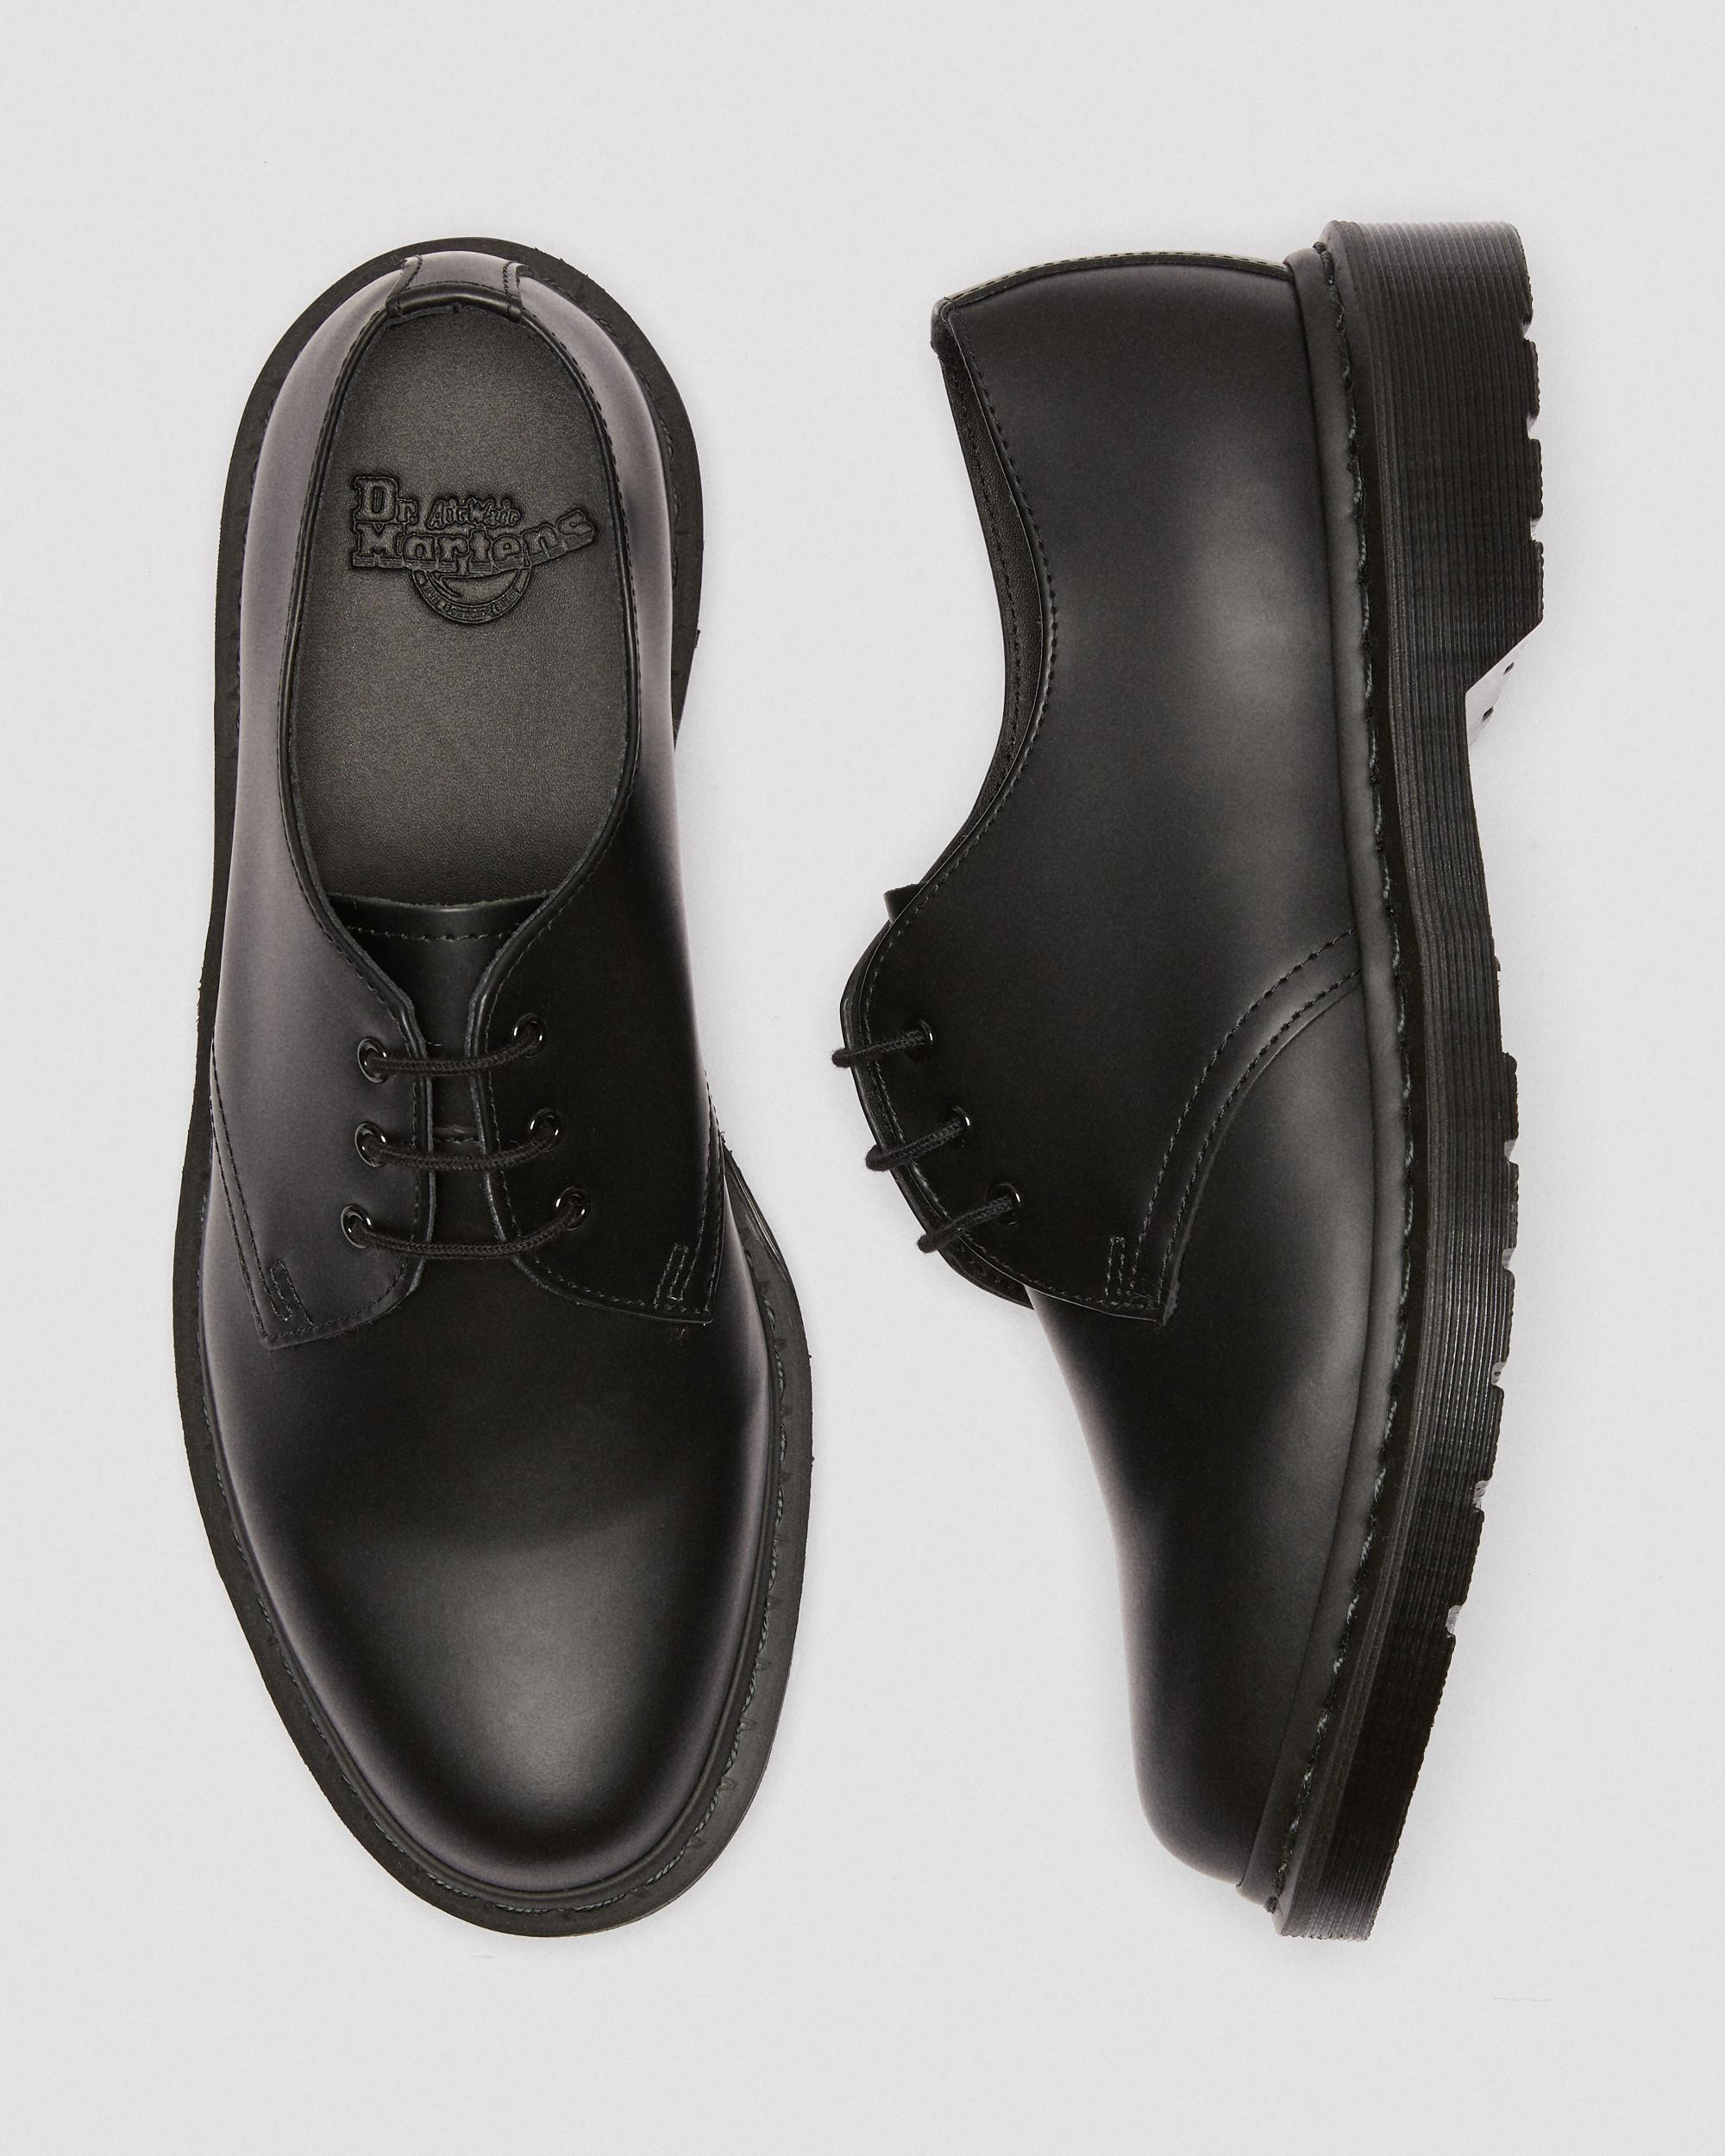 1461 Mono Smooth Leather Oxford Shoes in Black